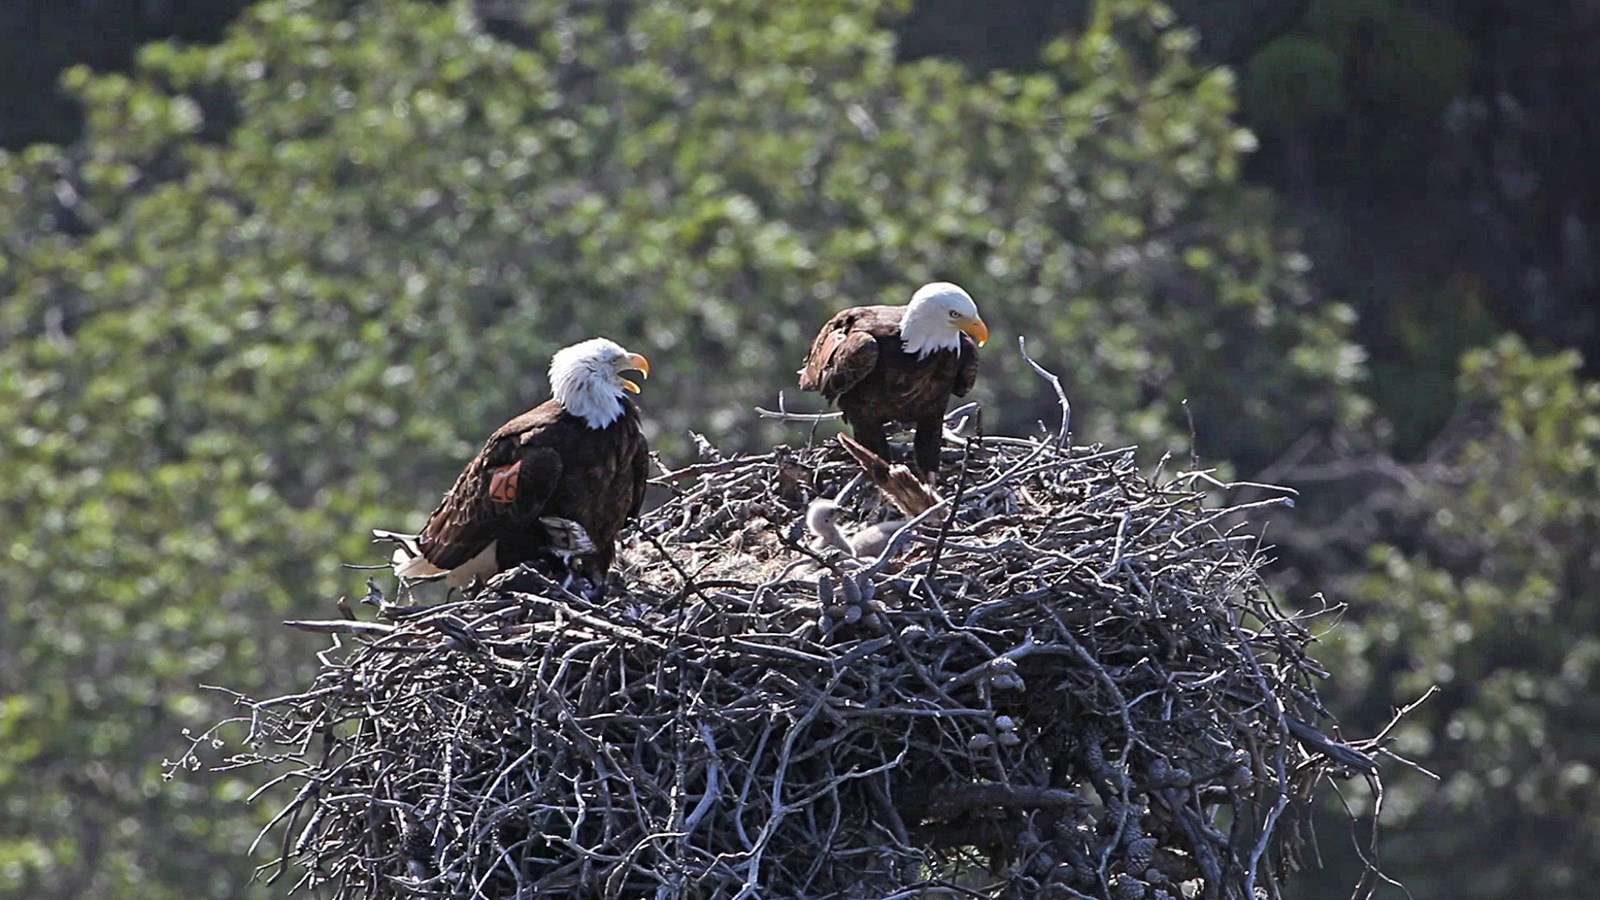 Large birds in large nest with two small chicks.